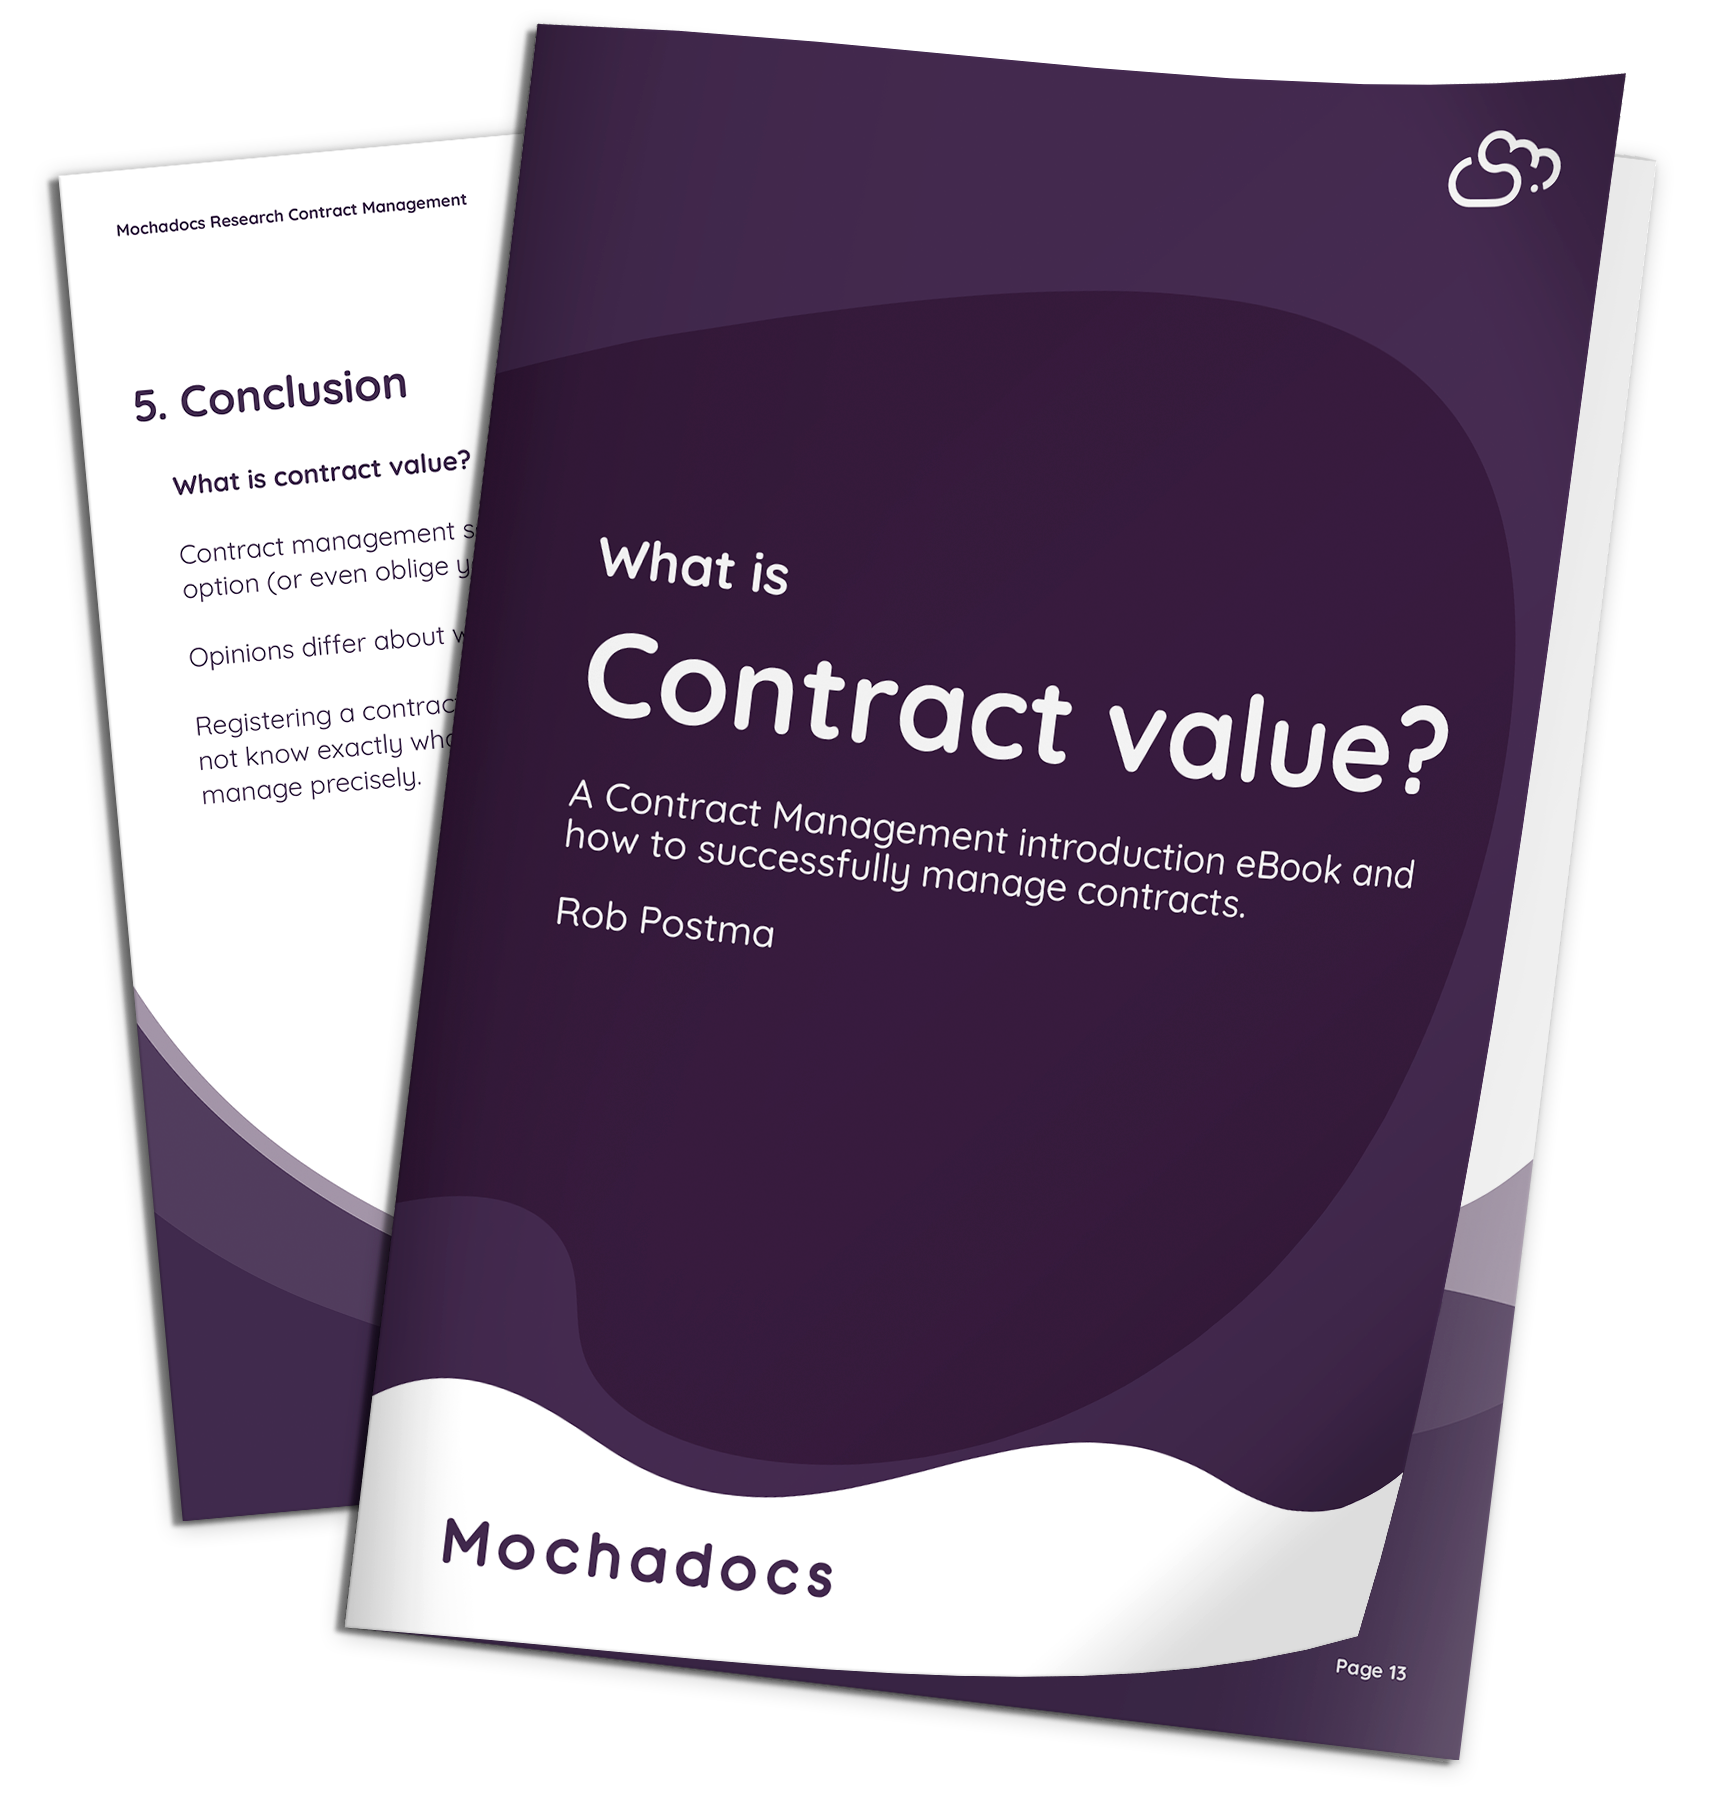 Mochadocs - Contract Management - eBooks - What is contract value